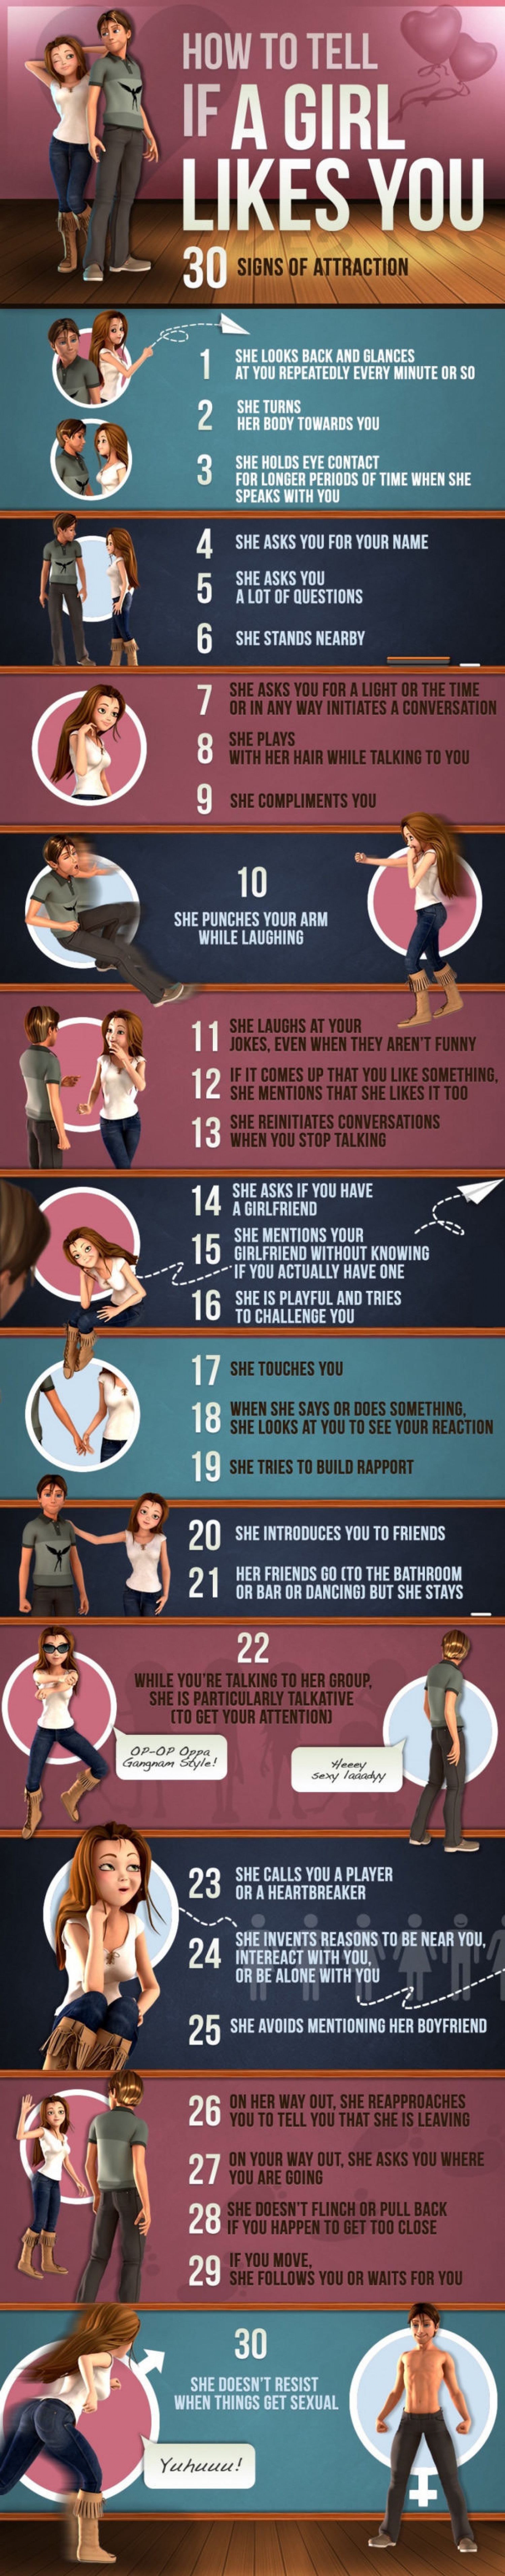 30 Signs of Attraction Infographic